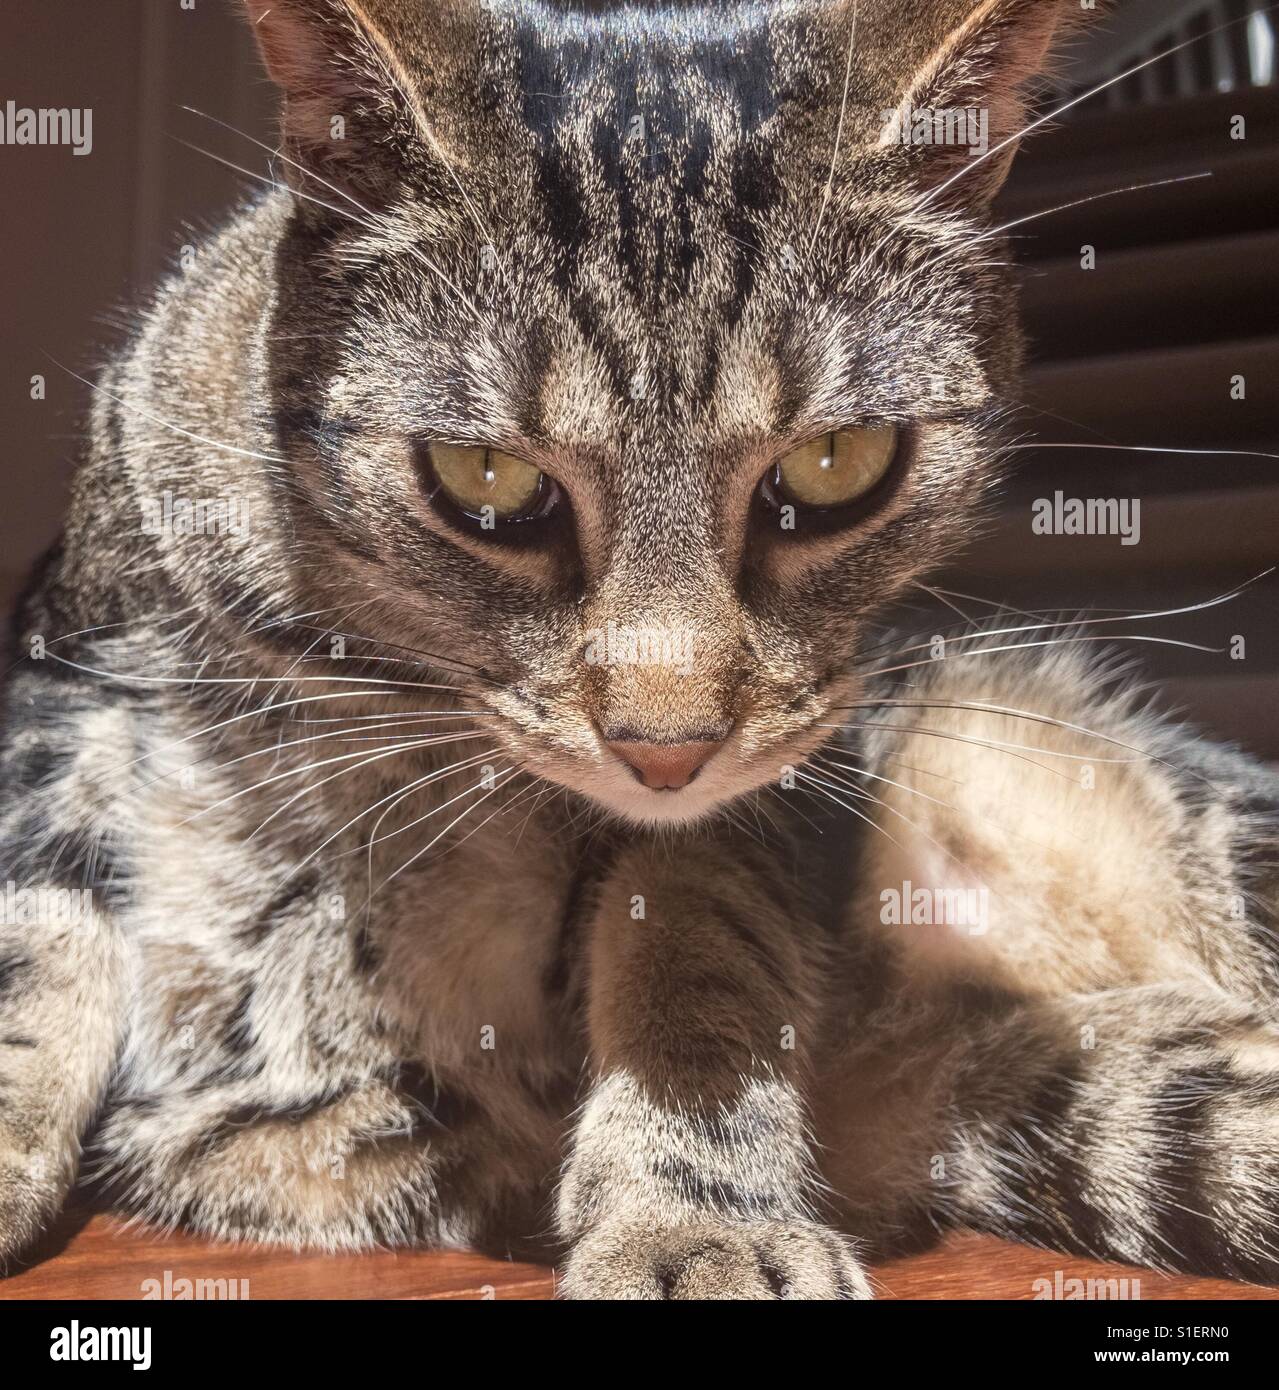 Close up of a tabby cat staring intently at the camera. Stock Photo